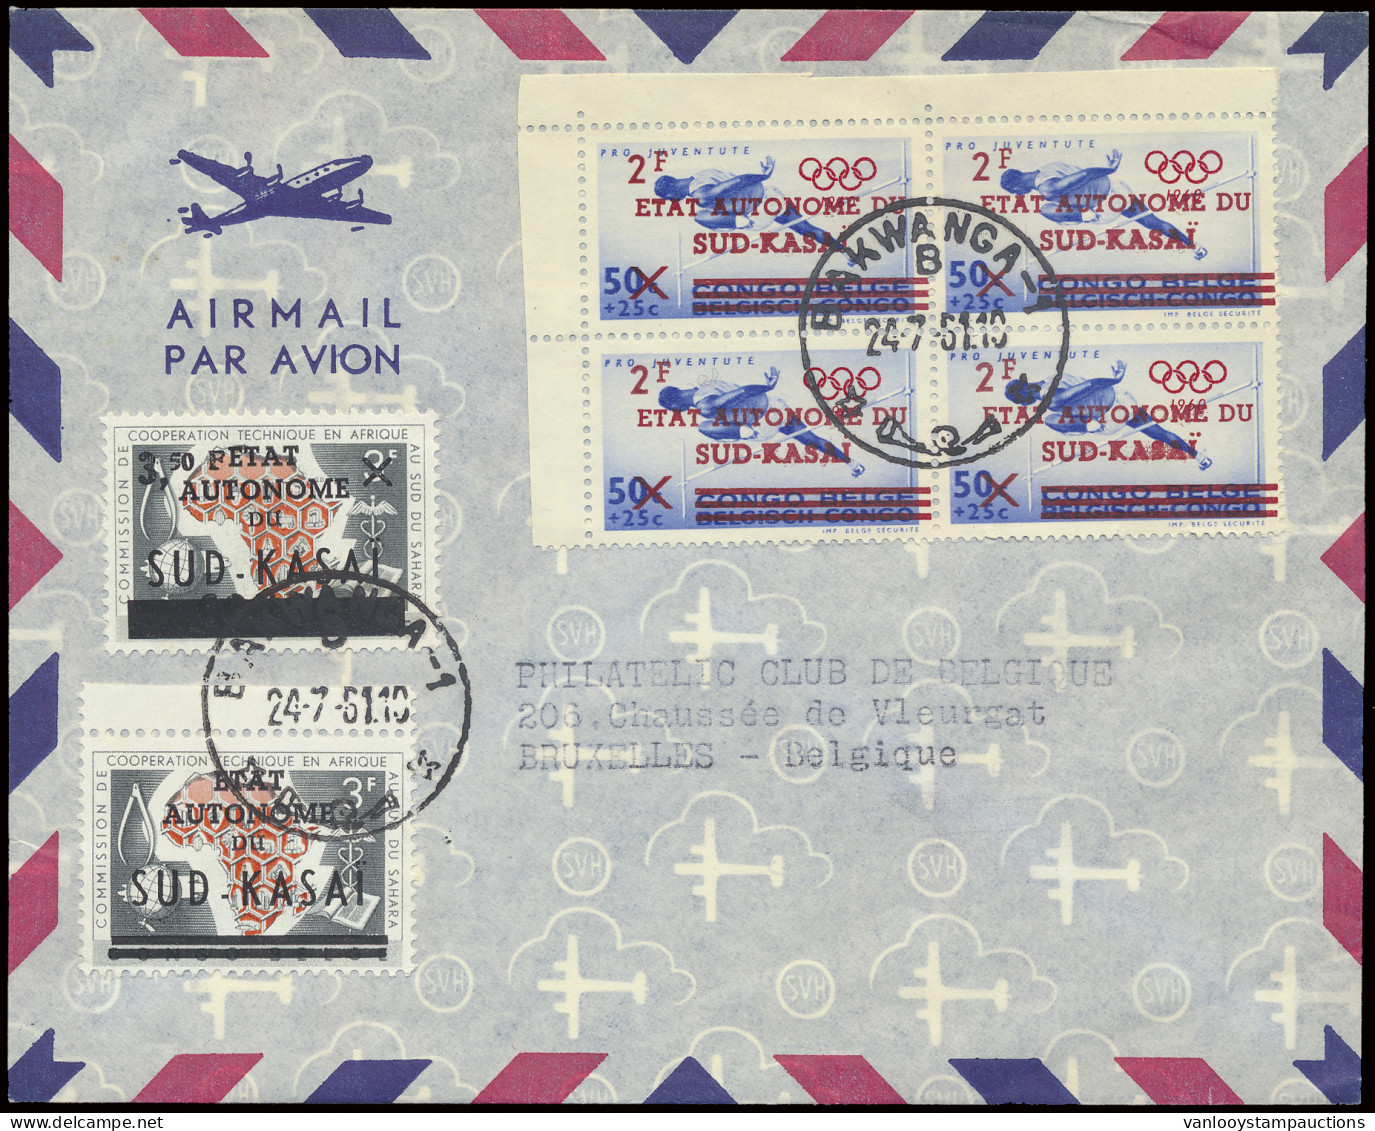 1961 Philatelic Club De Belgique Cover Franked With OBP N° 14/15 And 18 (bloc Of 4 With Corner Of Sheet) 3,50Fr. On 3Fr  - Sur Kasai